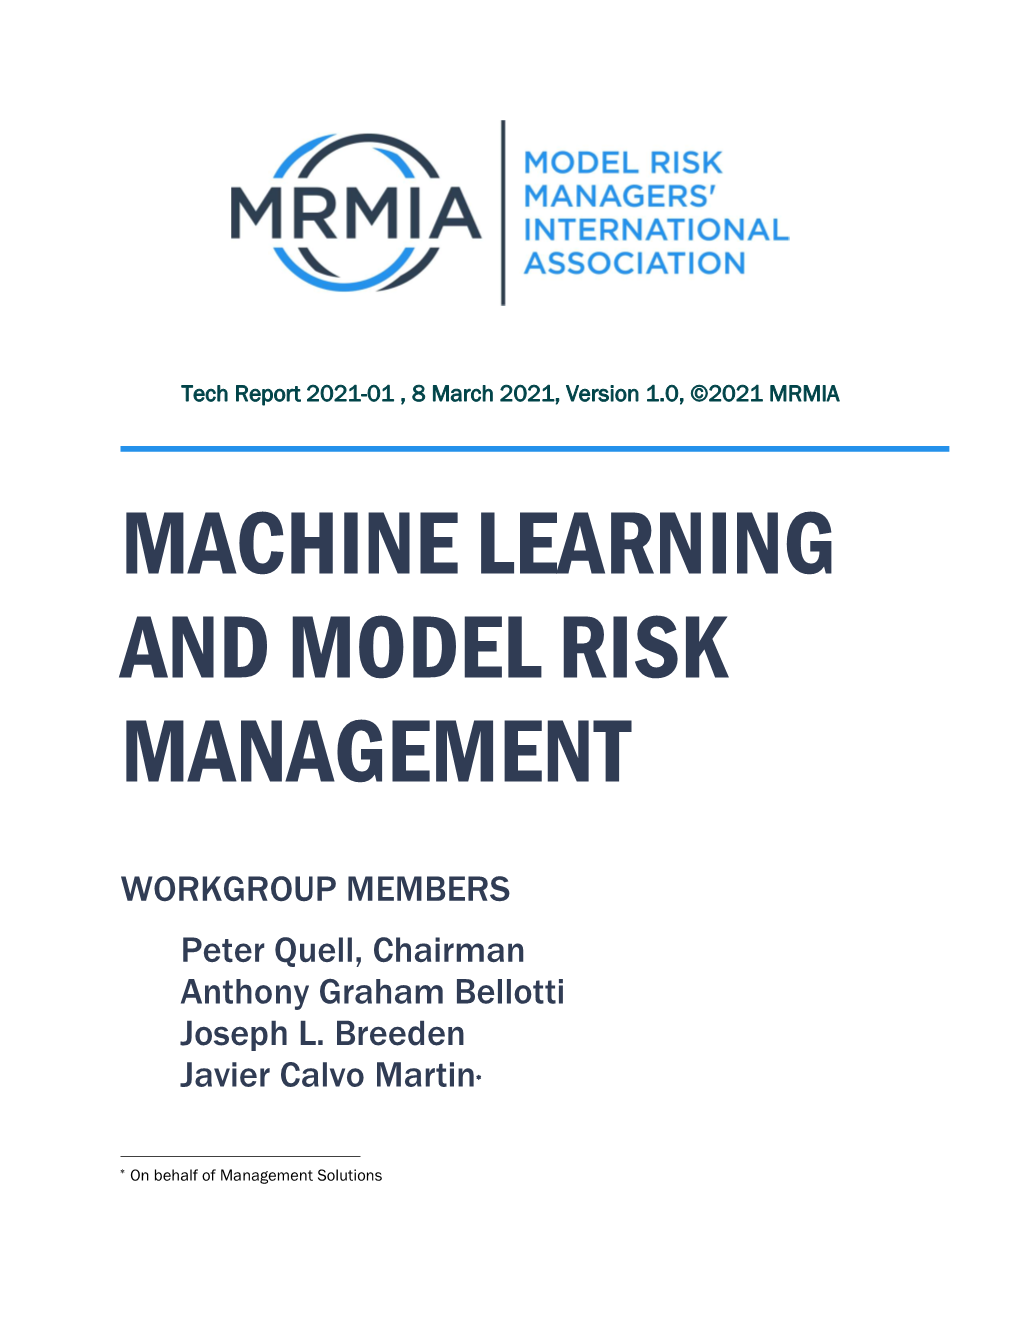 Machine Learning and Model Risk Management